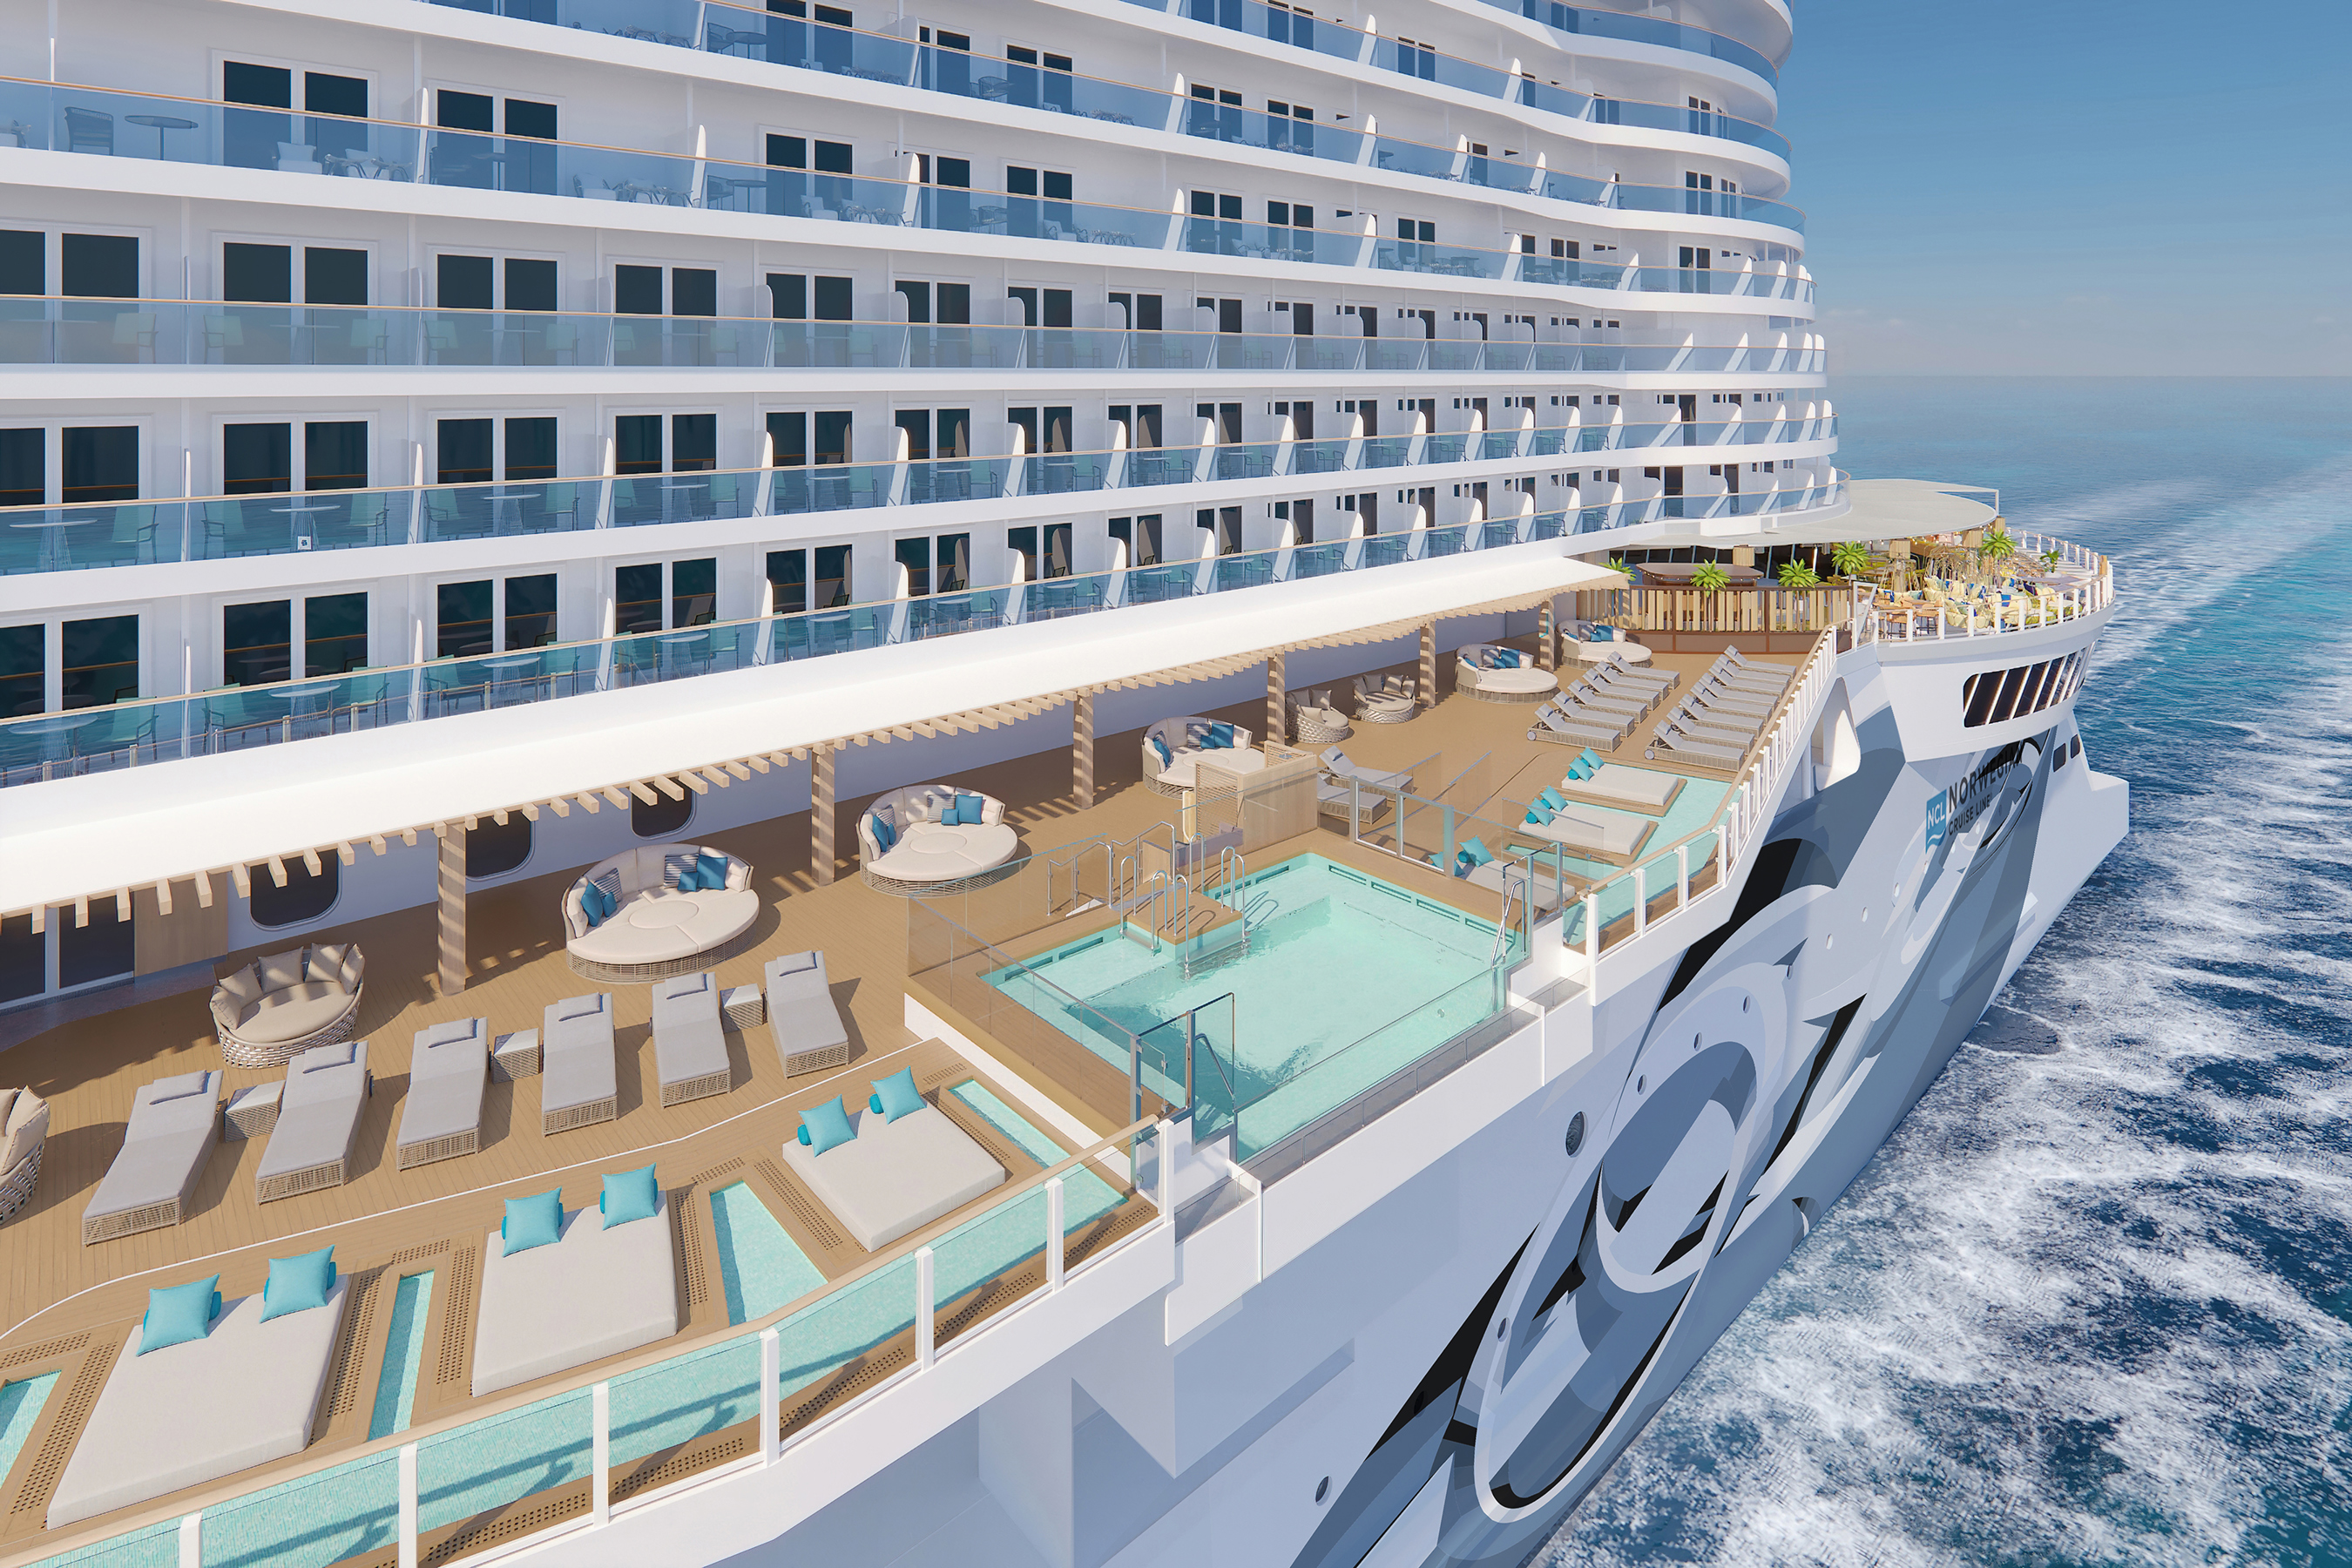 Travelers will enjoy spanning views from Norwegian Prima´s Ocean Boulevard, complete with infinity pools, dining options and a variety of experiences wrapping around the entire deck eight. Norwegian Prima to debut August 2022. #NorwegianPrima